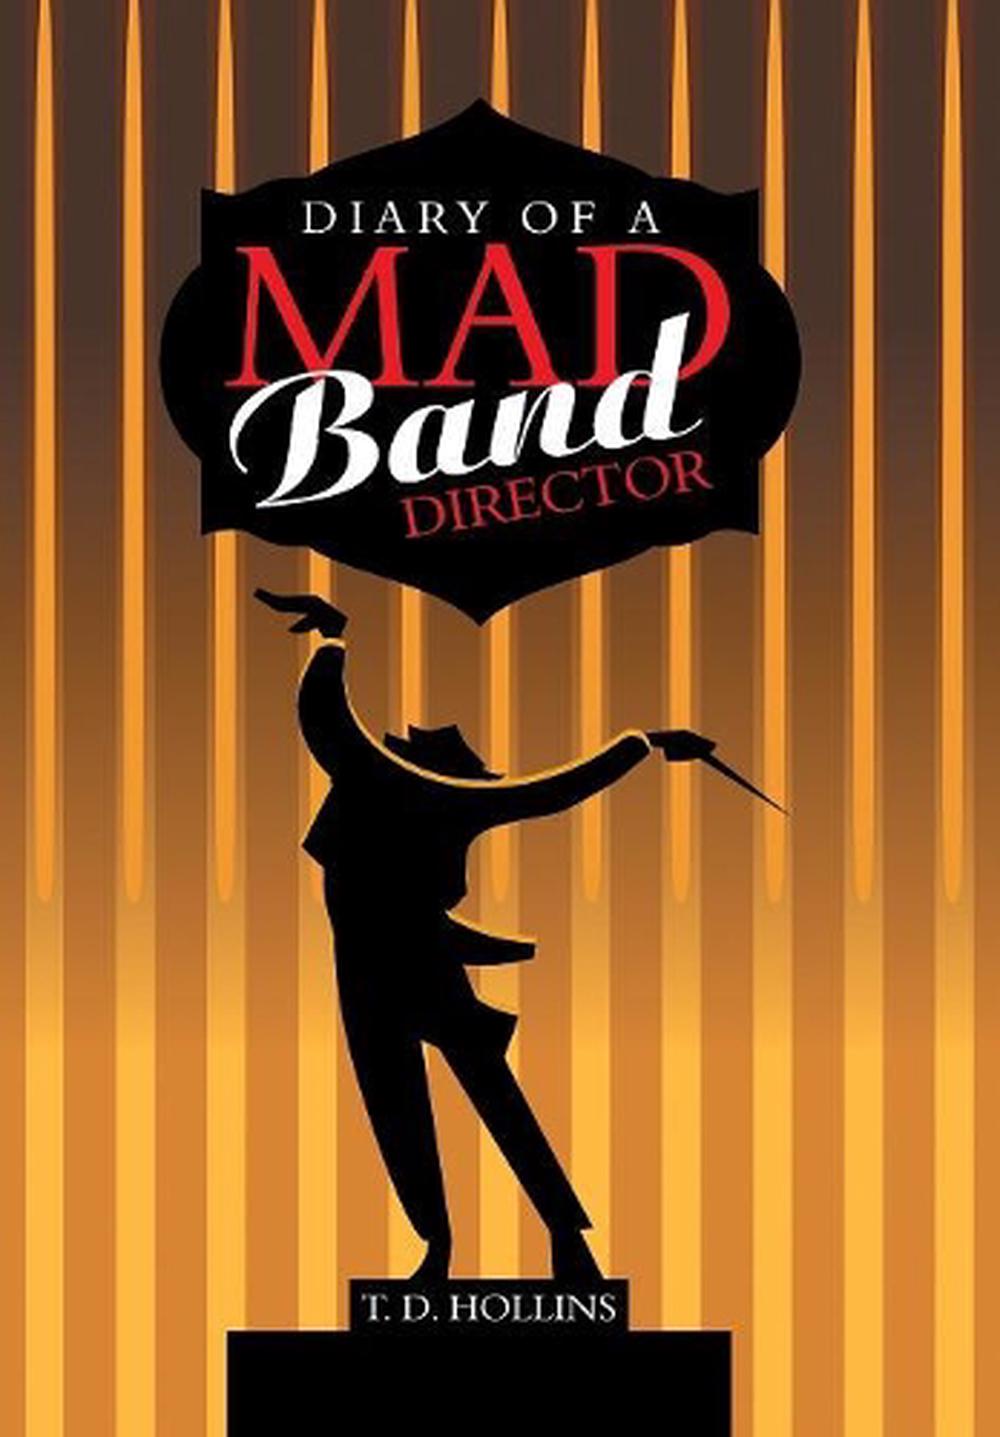 Diary of a Mad Band Director by T.D. Hollins Hardcover Book Free ...